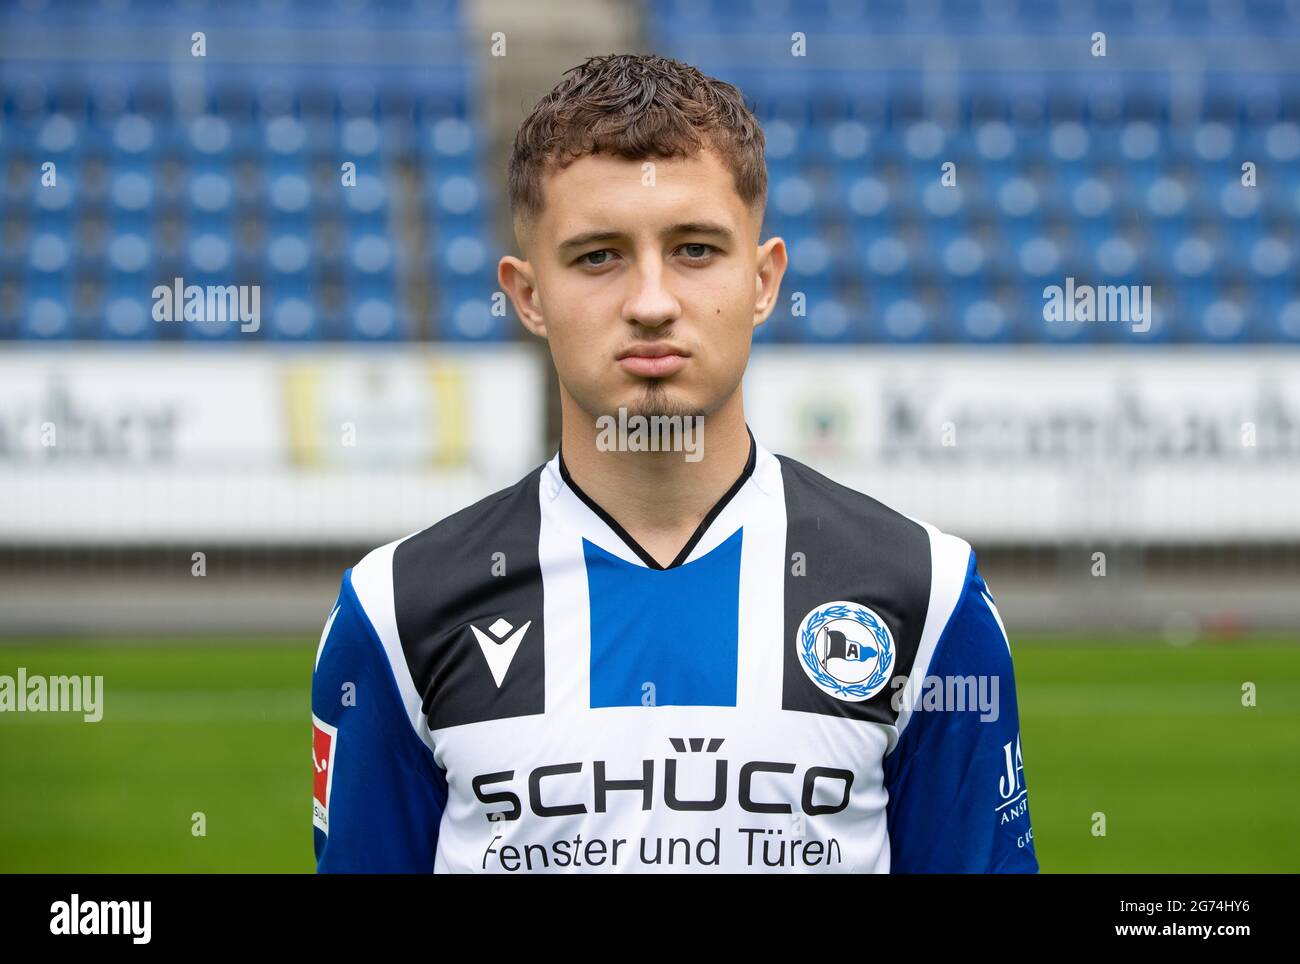 Bielefeld, Germany. 09th July, 2021. Football: Bundesliga, photo  opportunity Arminia Bielefeld for the 2021/22 season at the Schüco Arena:  player Vladislav Cherny. Credit: Friso Gentsch/dpa - only for use in  accordance with